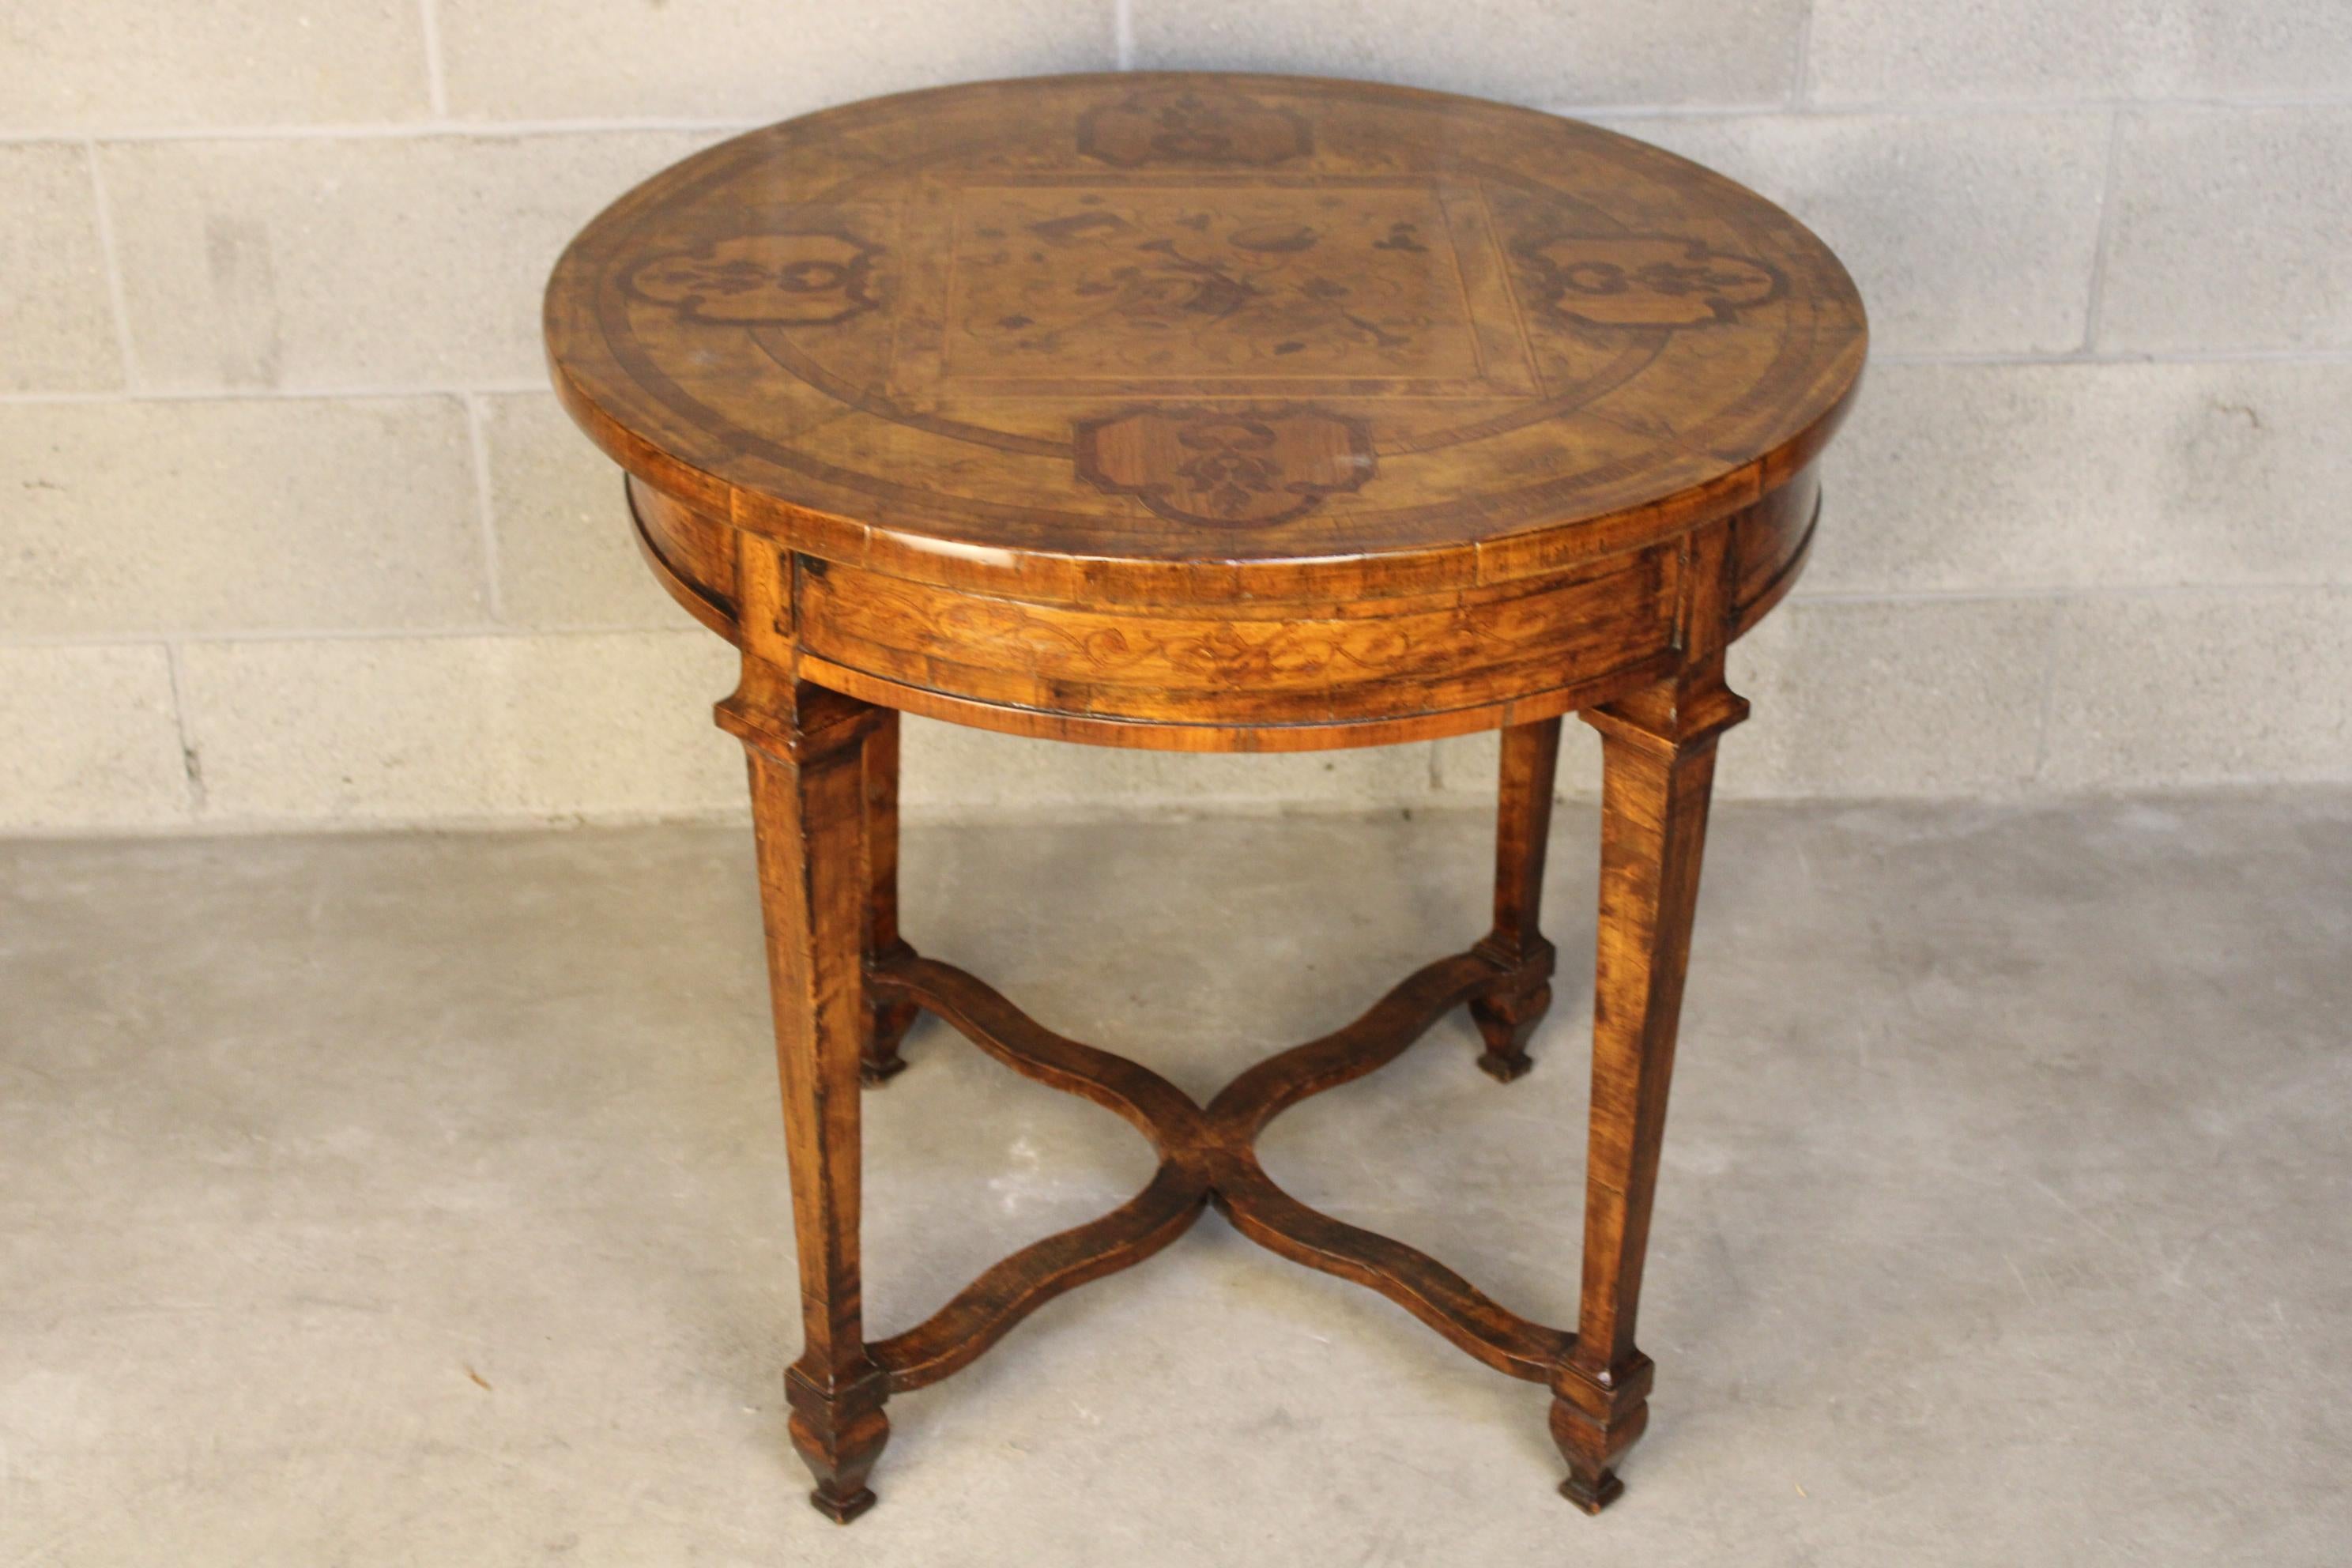 19th century Louis XVI style  inlaid center table about 1790 France generally in very good condition. Table has been restored . has been repaired some few inlaid motifs lightly. and has been restored some color changings by proffesional